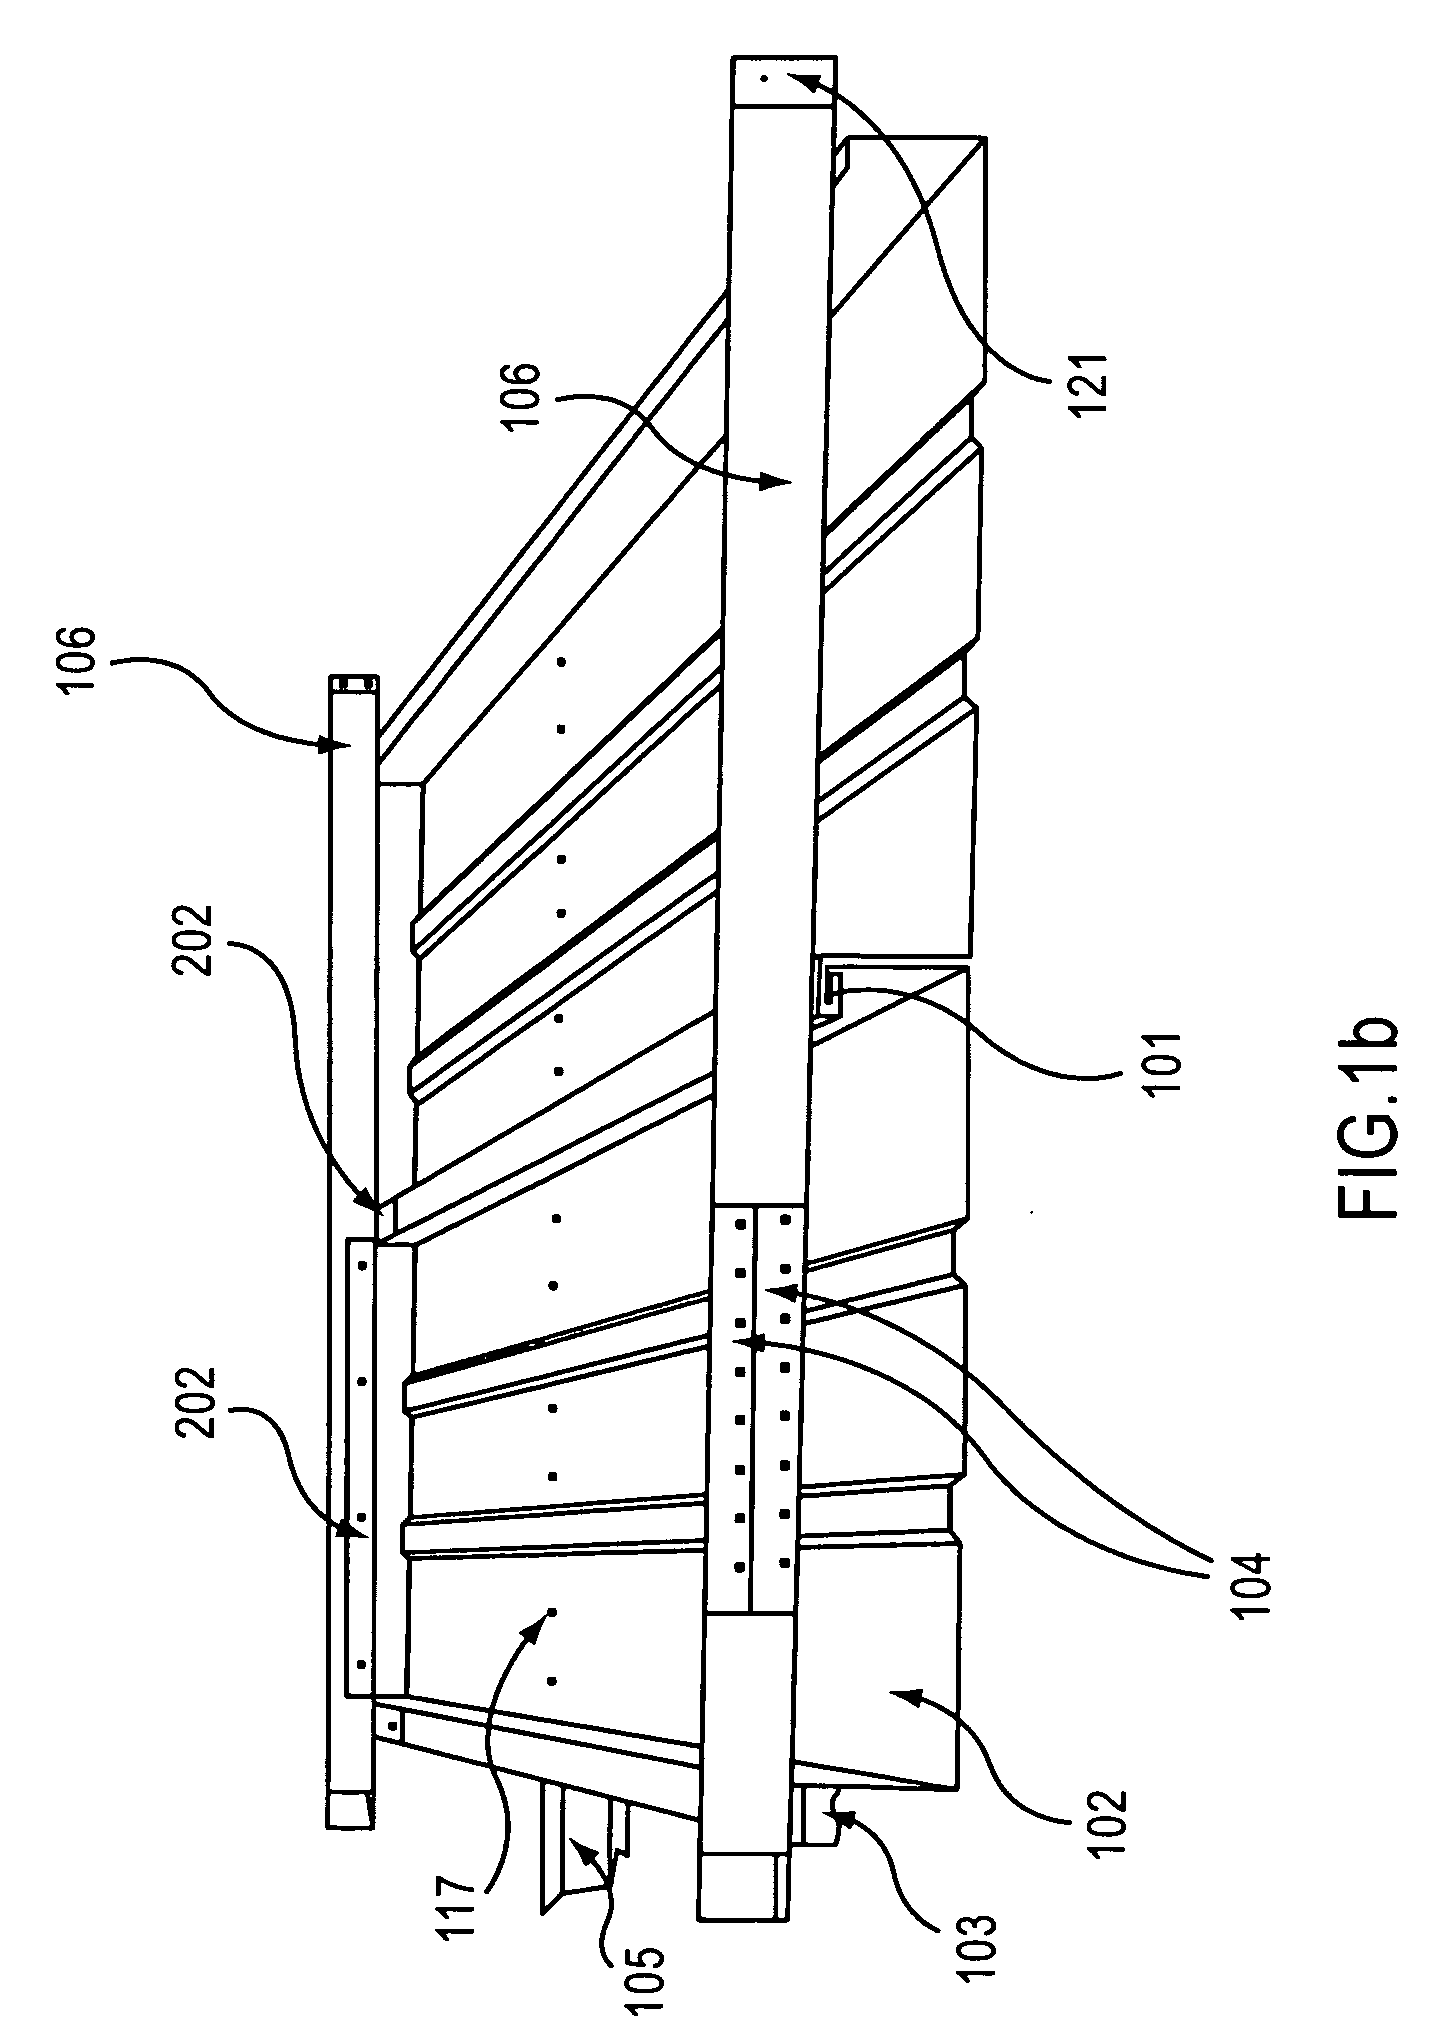 Apparatus and method for securing a roof assembly during a severe wind storm